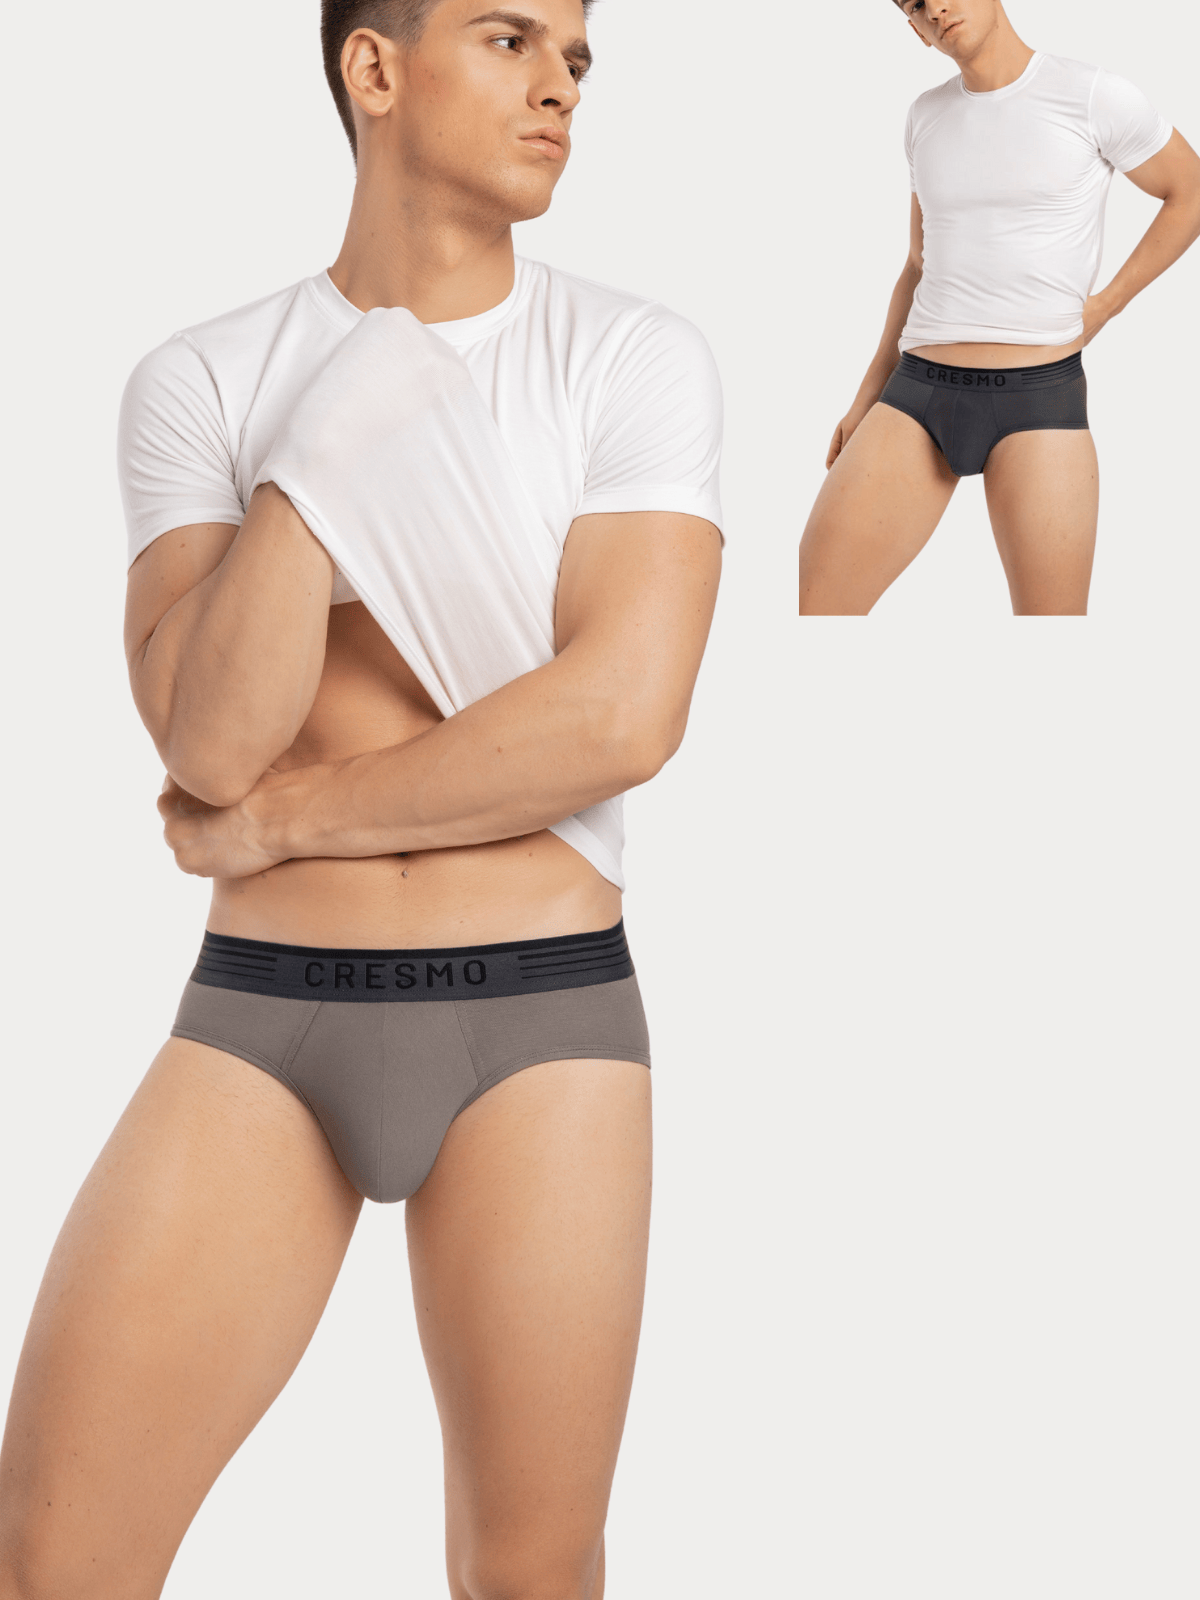 CRESMO | CRESMO Men's Anti-Microbial Micro Modal Underwear Breathable Ultra Soft Comfort Lightweight Brief (Pack of 2) 0